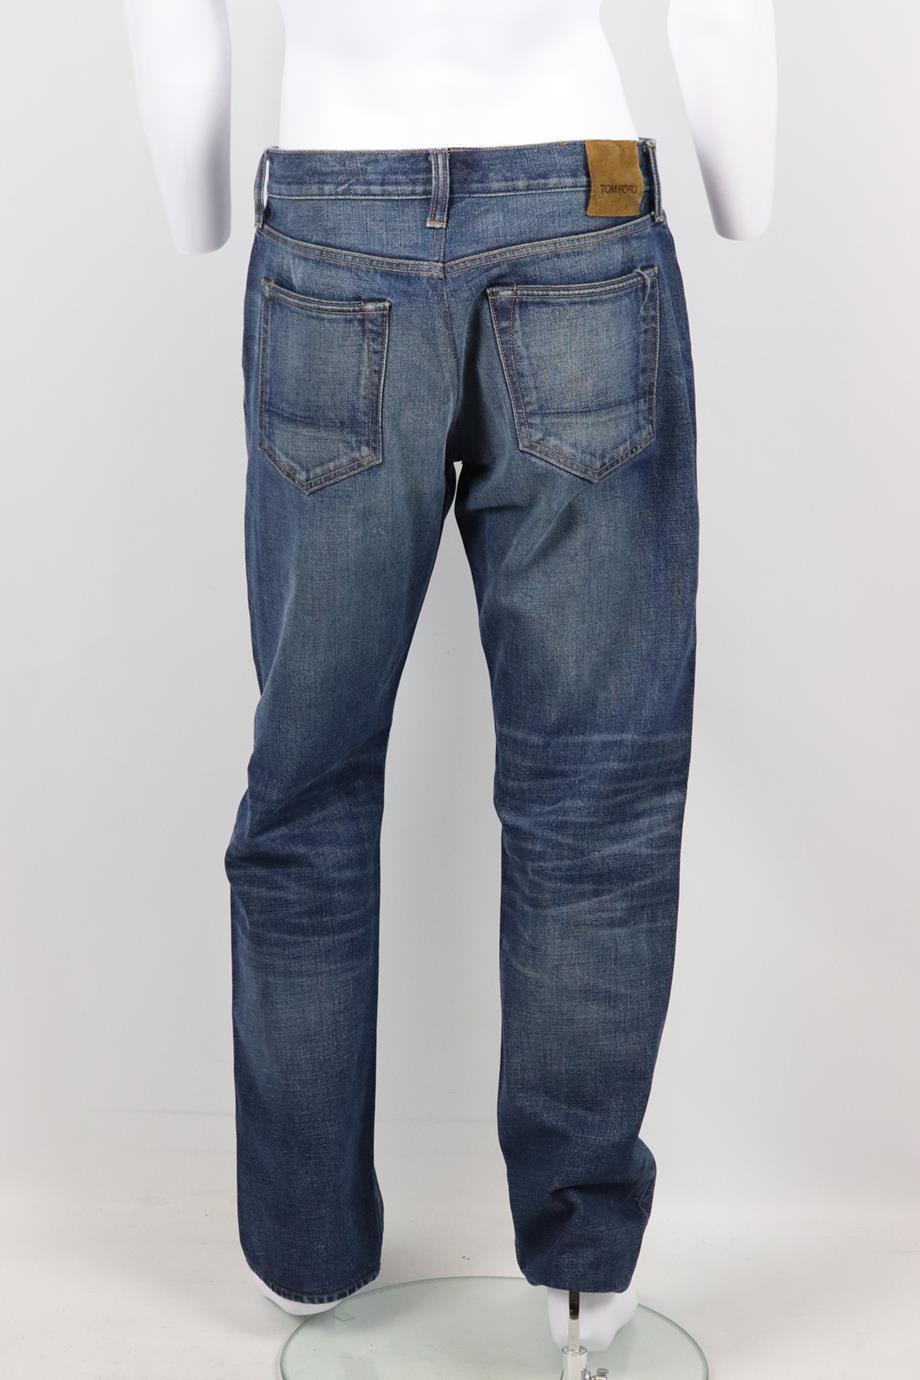 34 size jeans in us